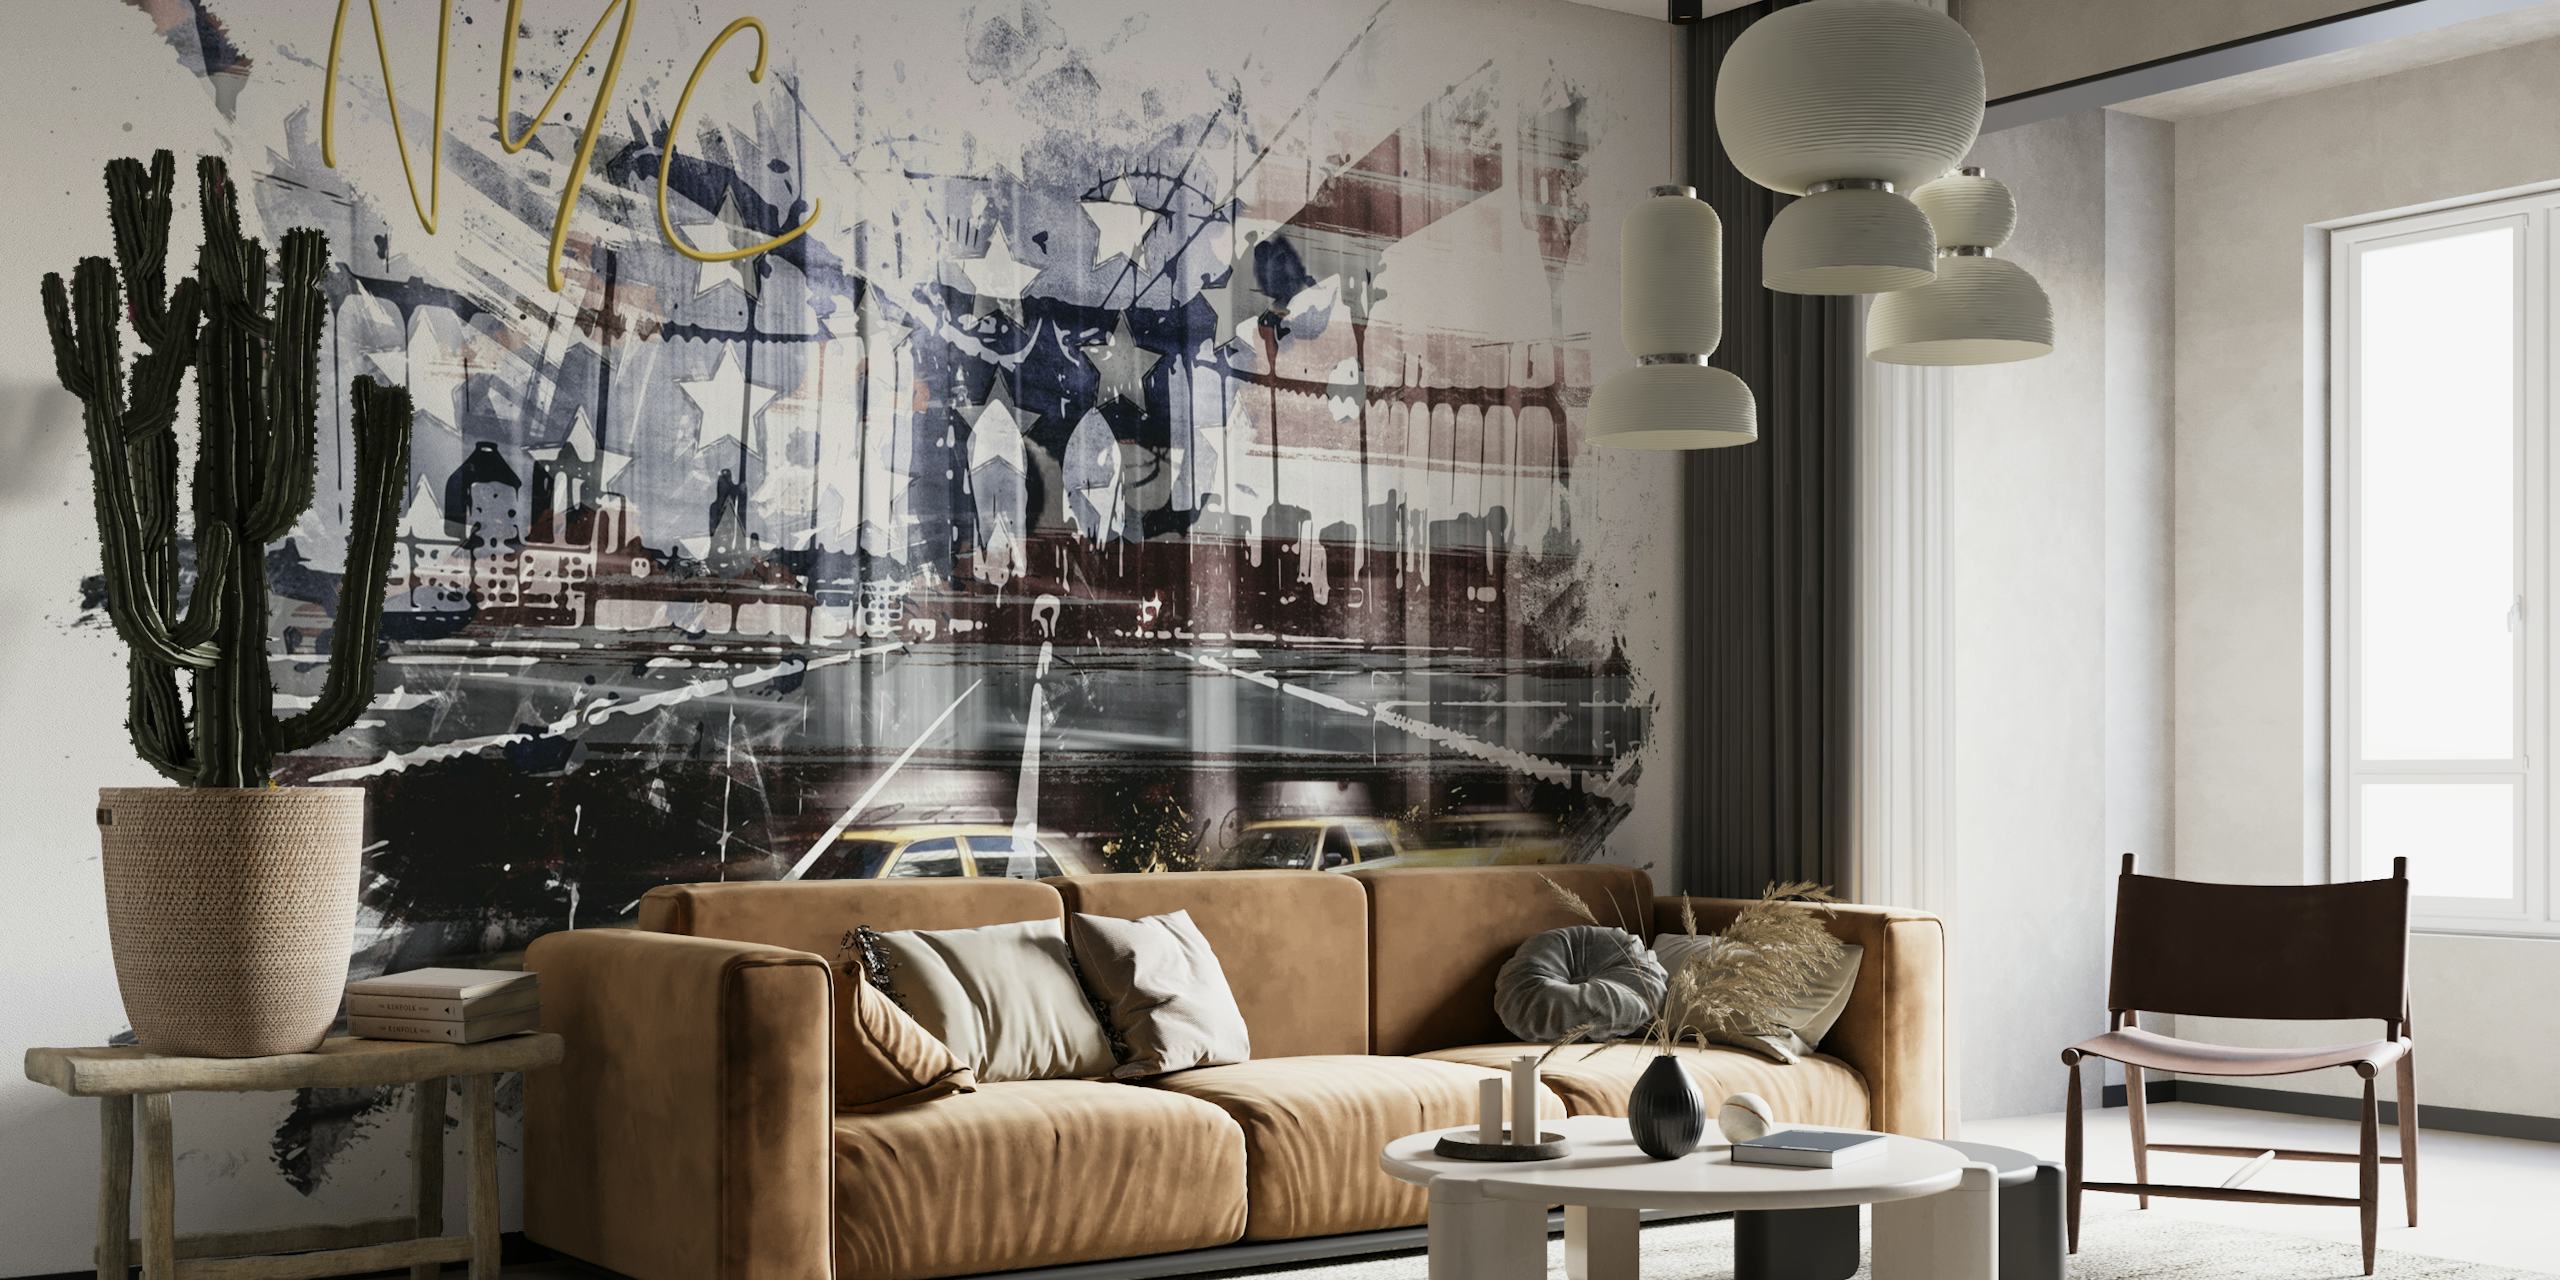 Abstract New York City skyline wall mural with artistic splashes and yellow taxi highlights